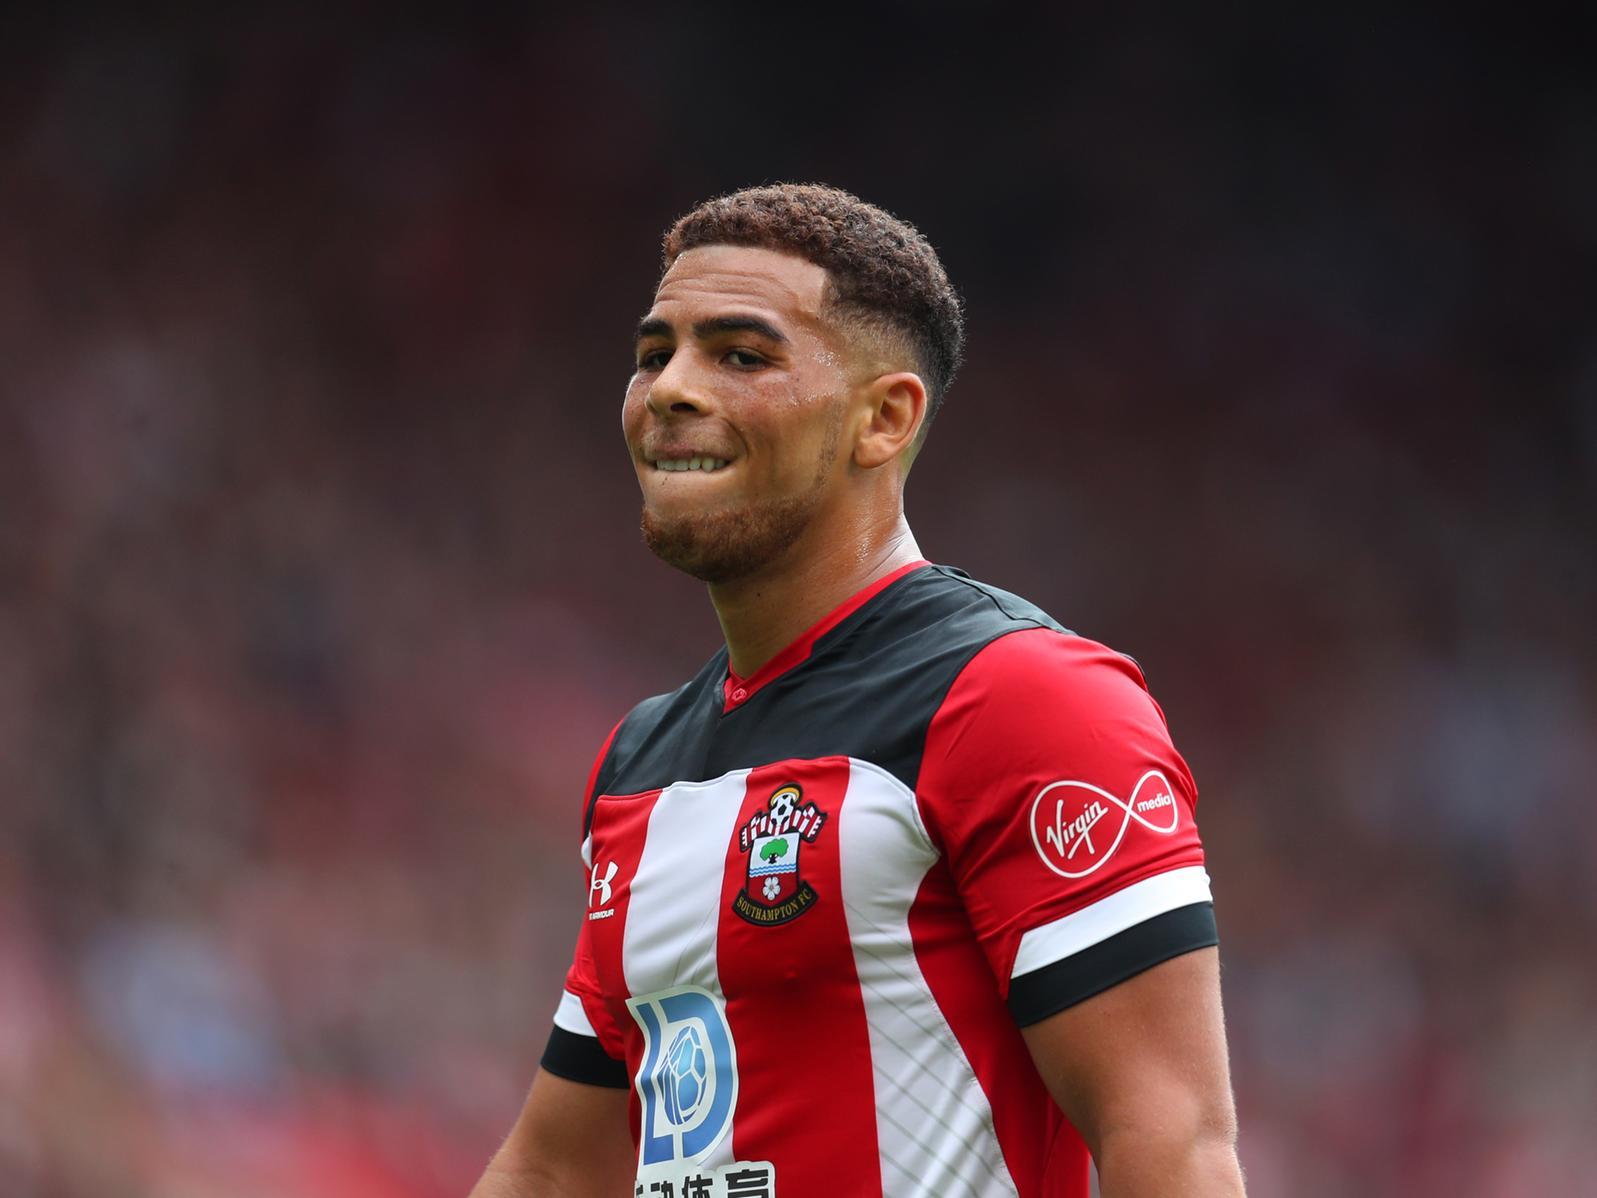 Leeds United's hopes of signing Southampton's Che Adams on loan look to have taken a huge blow, with Saints boss Ralph Hasenhuttl said to have blocked his exit. (Daily Mail)